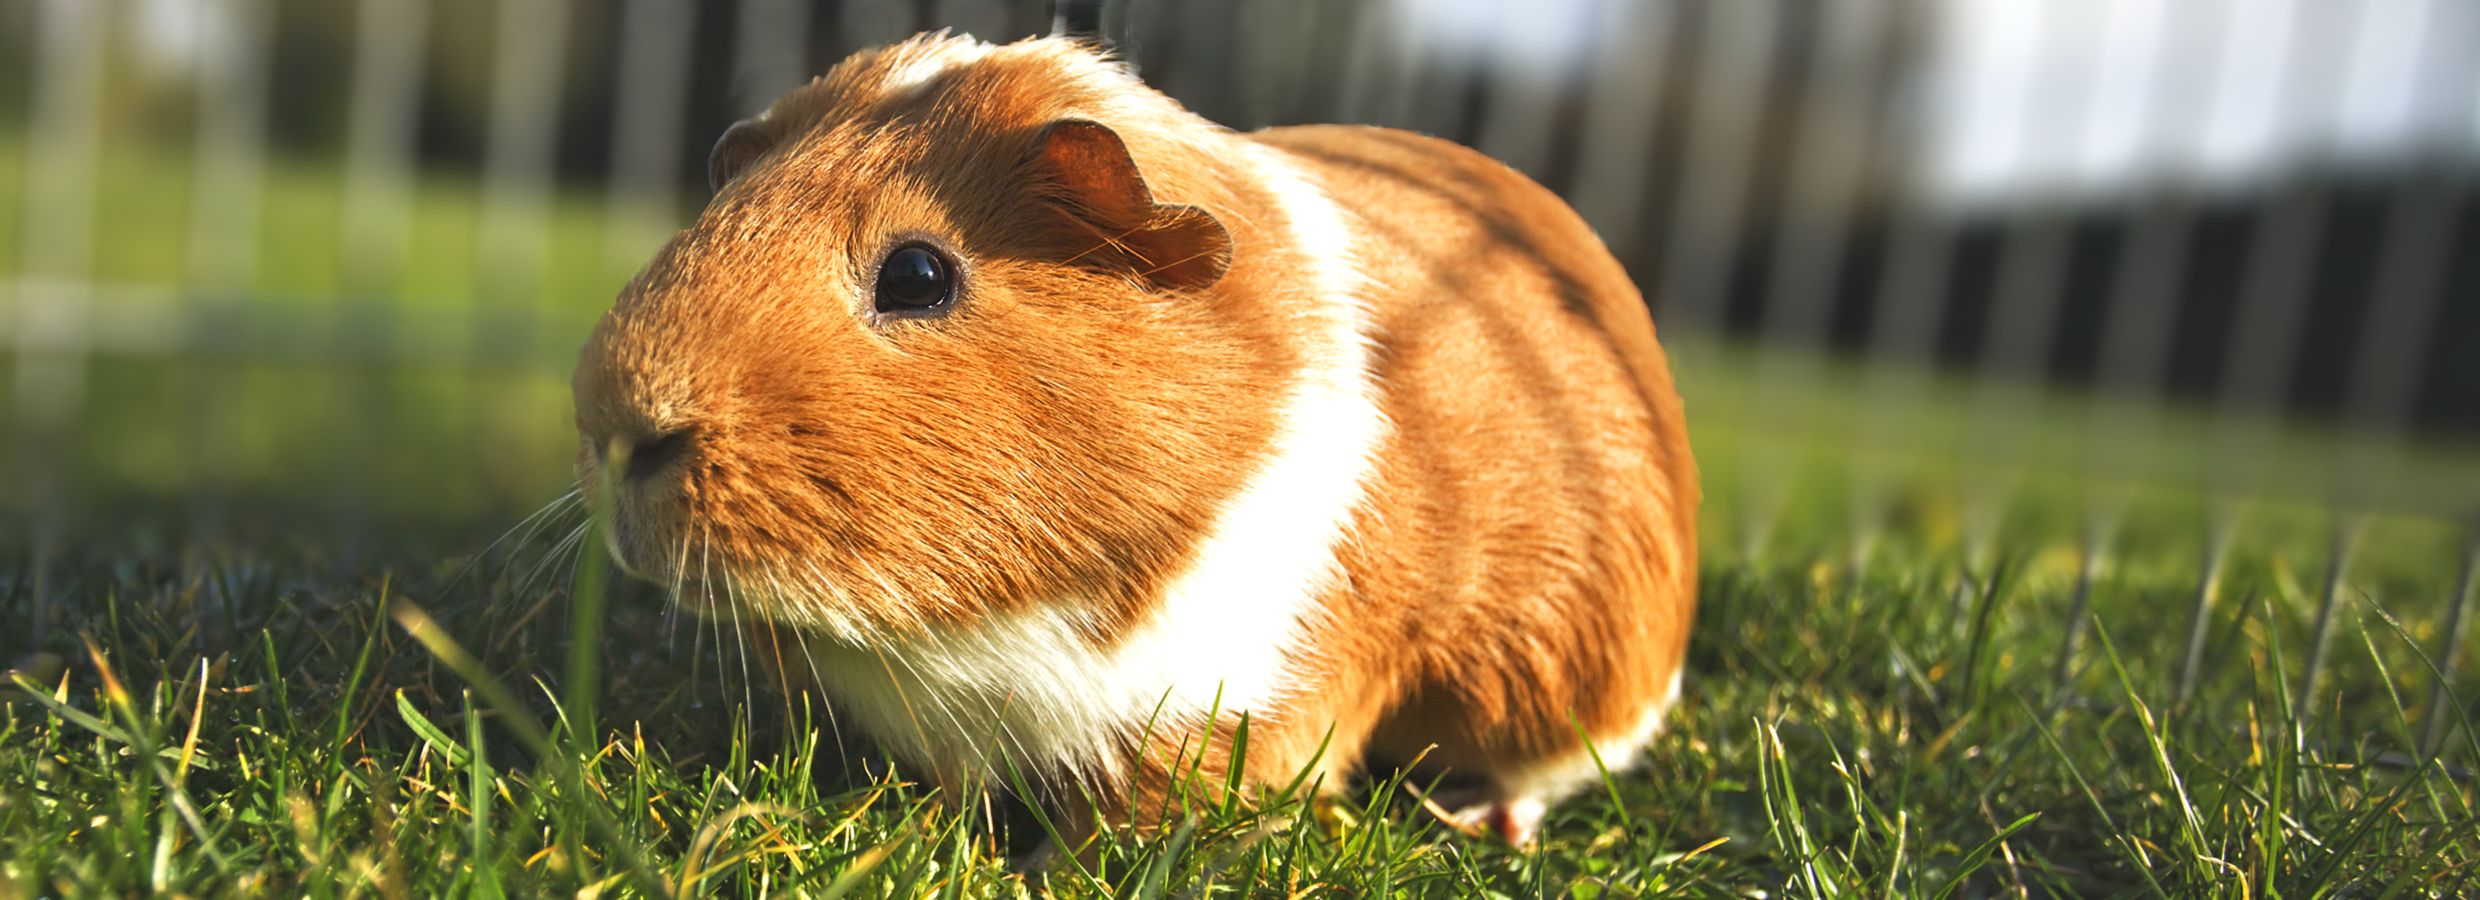 how much does a guinea pig cost with all the supplies